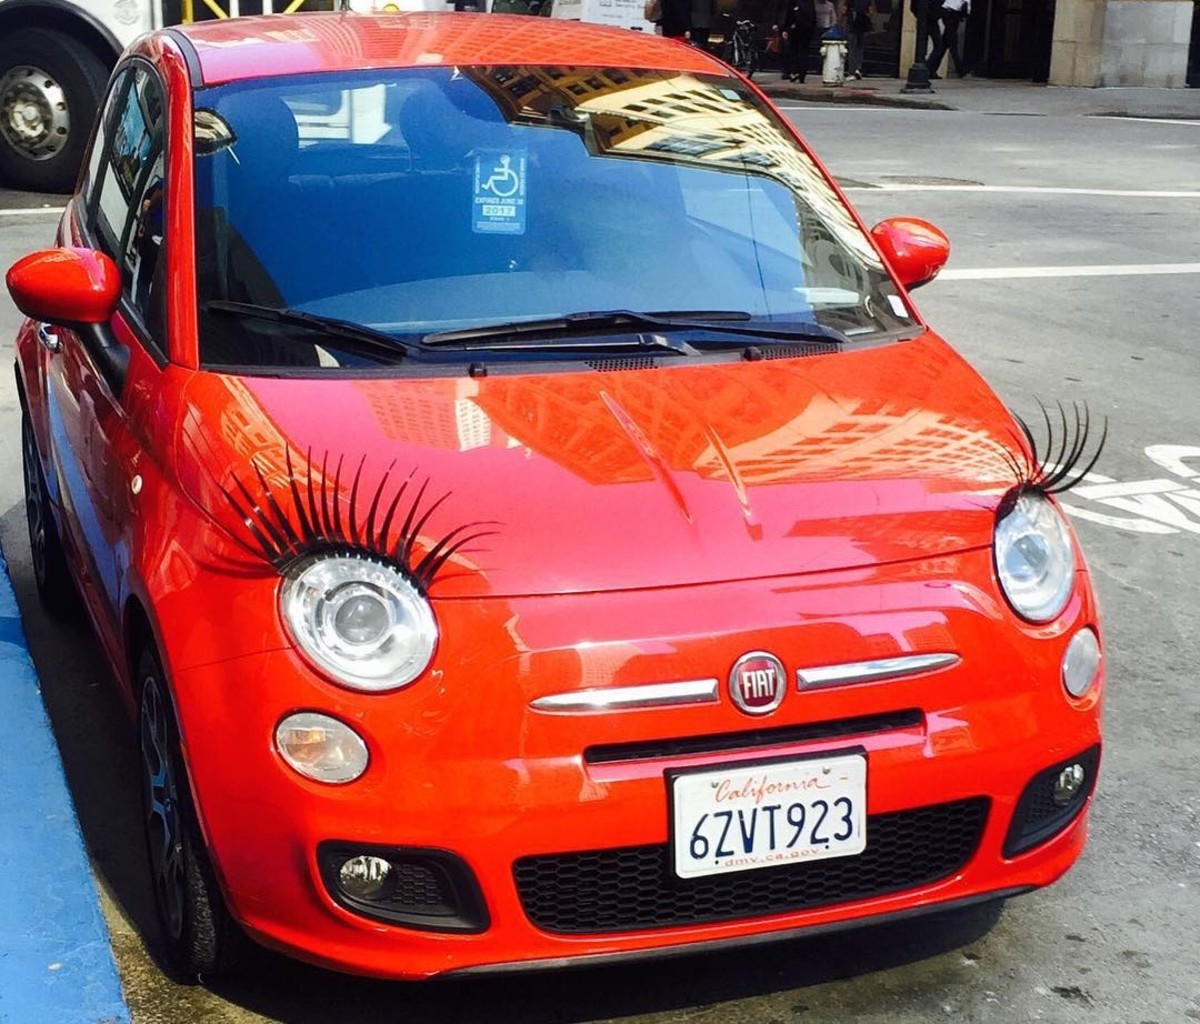 11 Cute Ways to Make Your Car More Girly and Glamorous